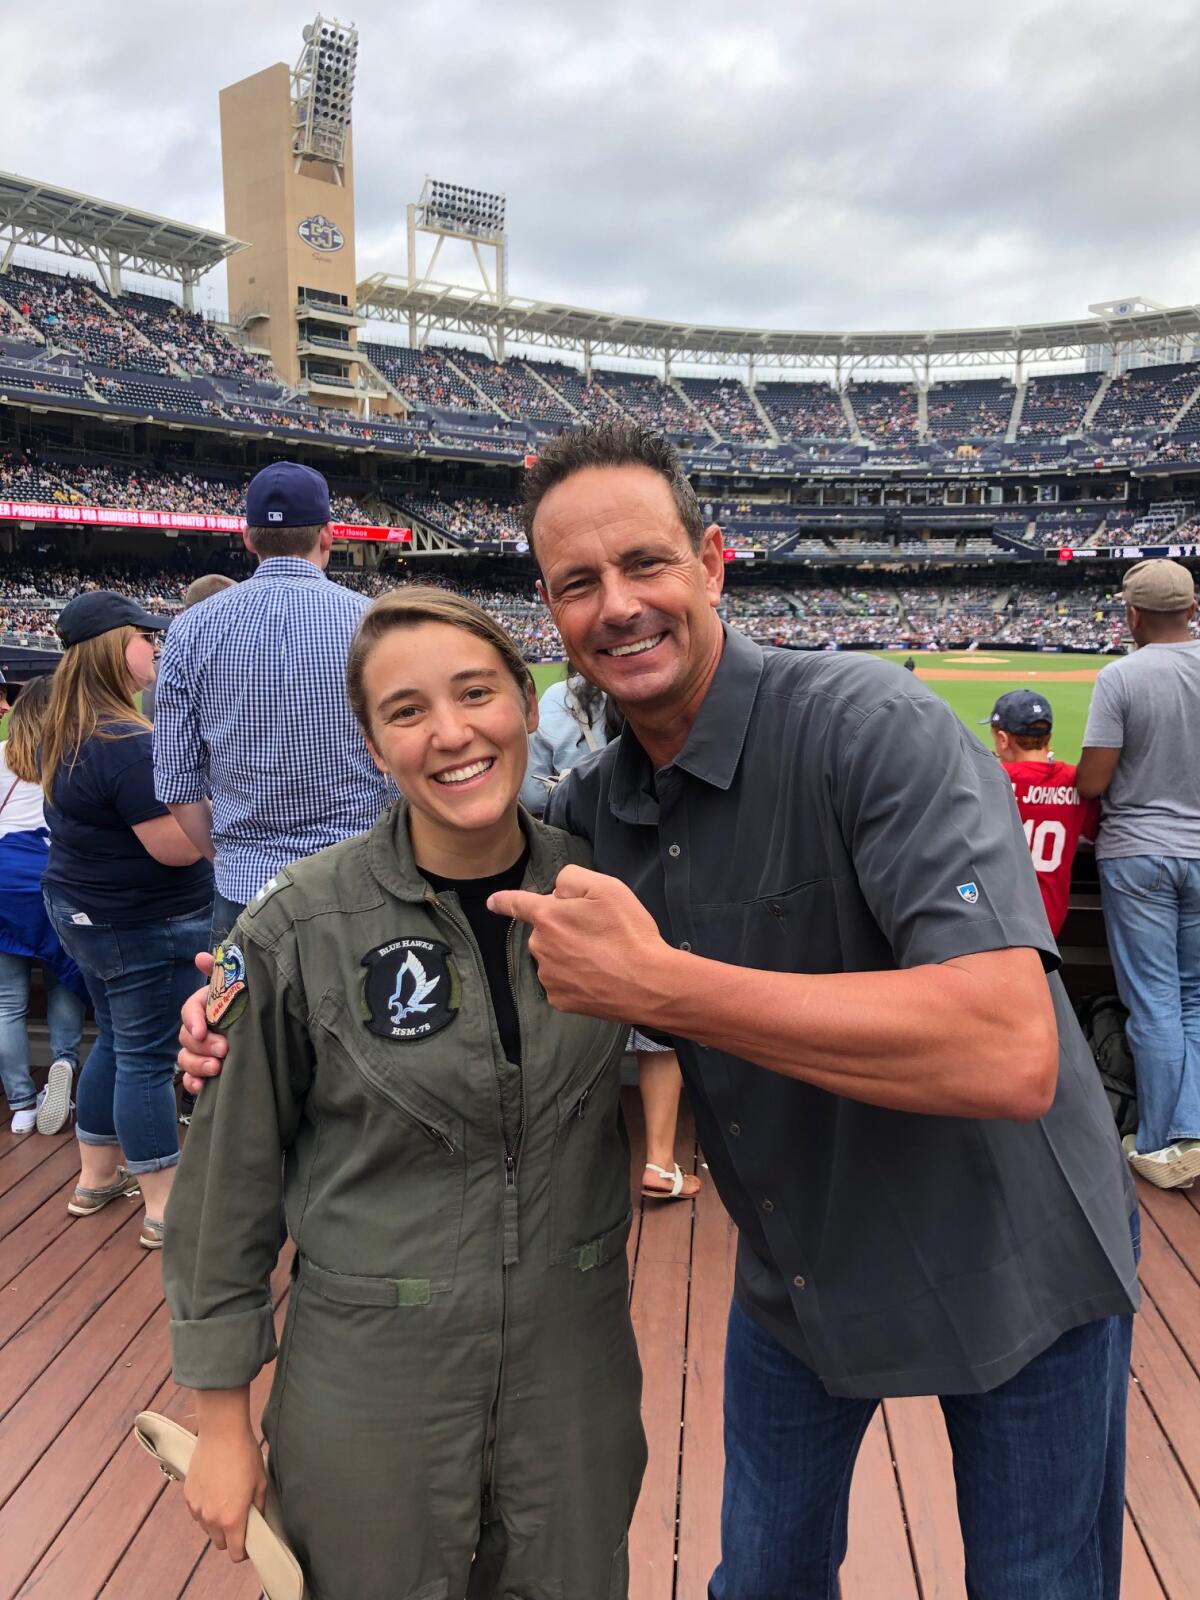 Navy pilot/show promoter with Andy Ashby, a two-time MLB All-Star and former San Diego Padre.